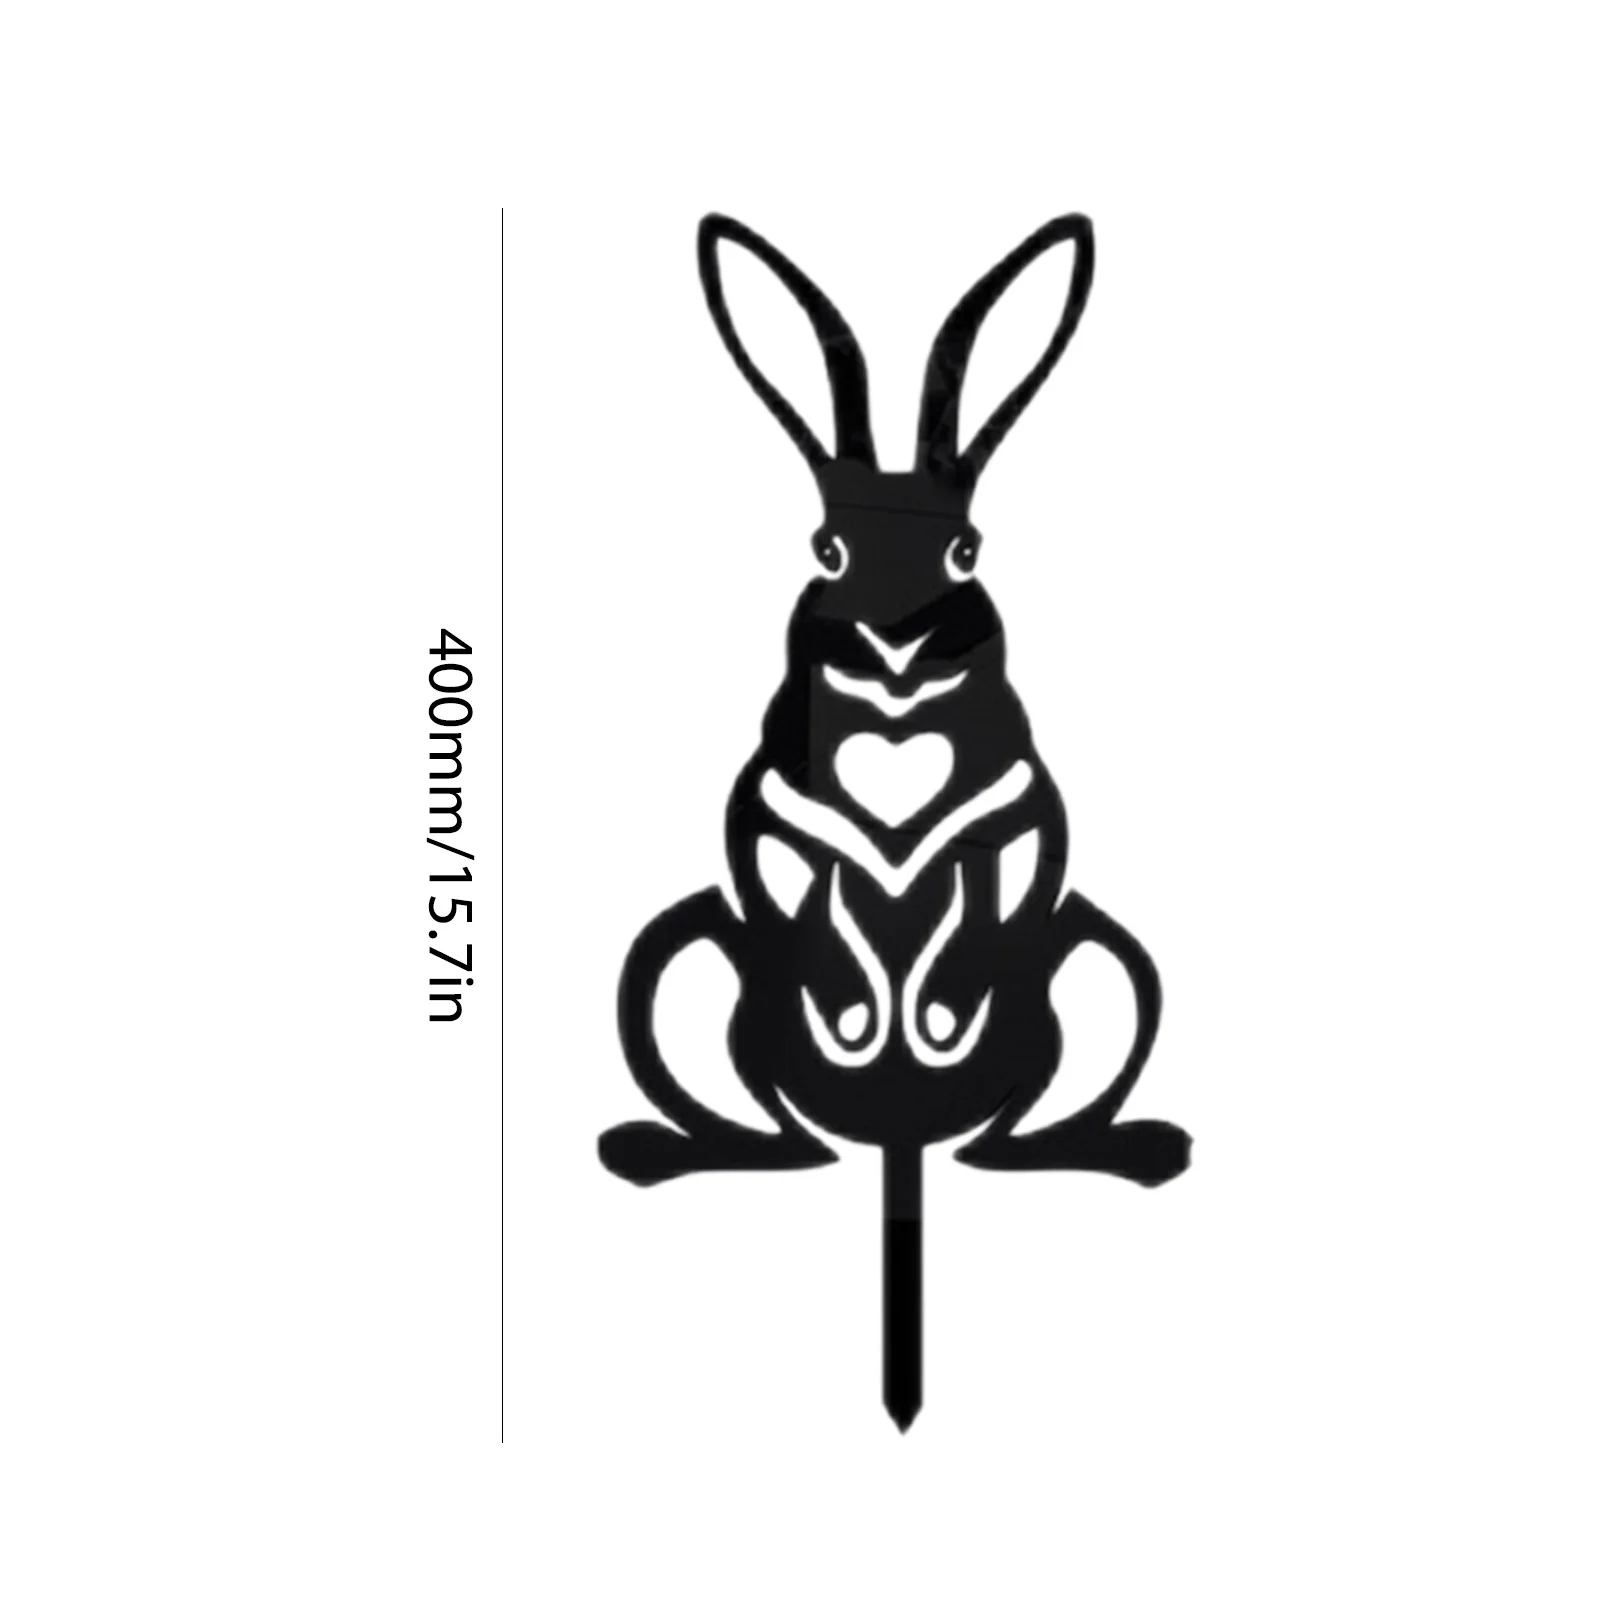 Cartoon Rabbit Silhouette PNG And Vector Images Free Download - Pngtree